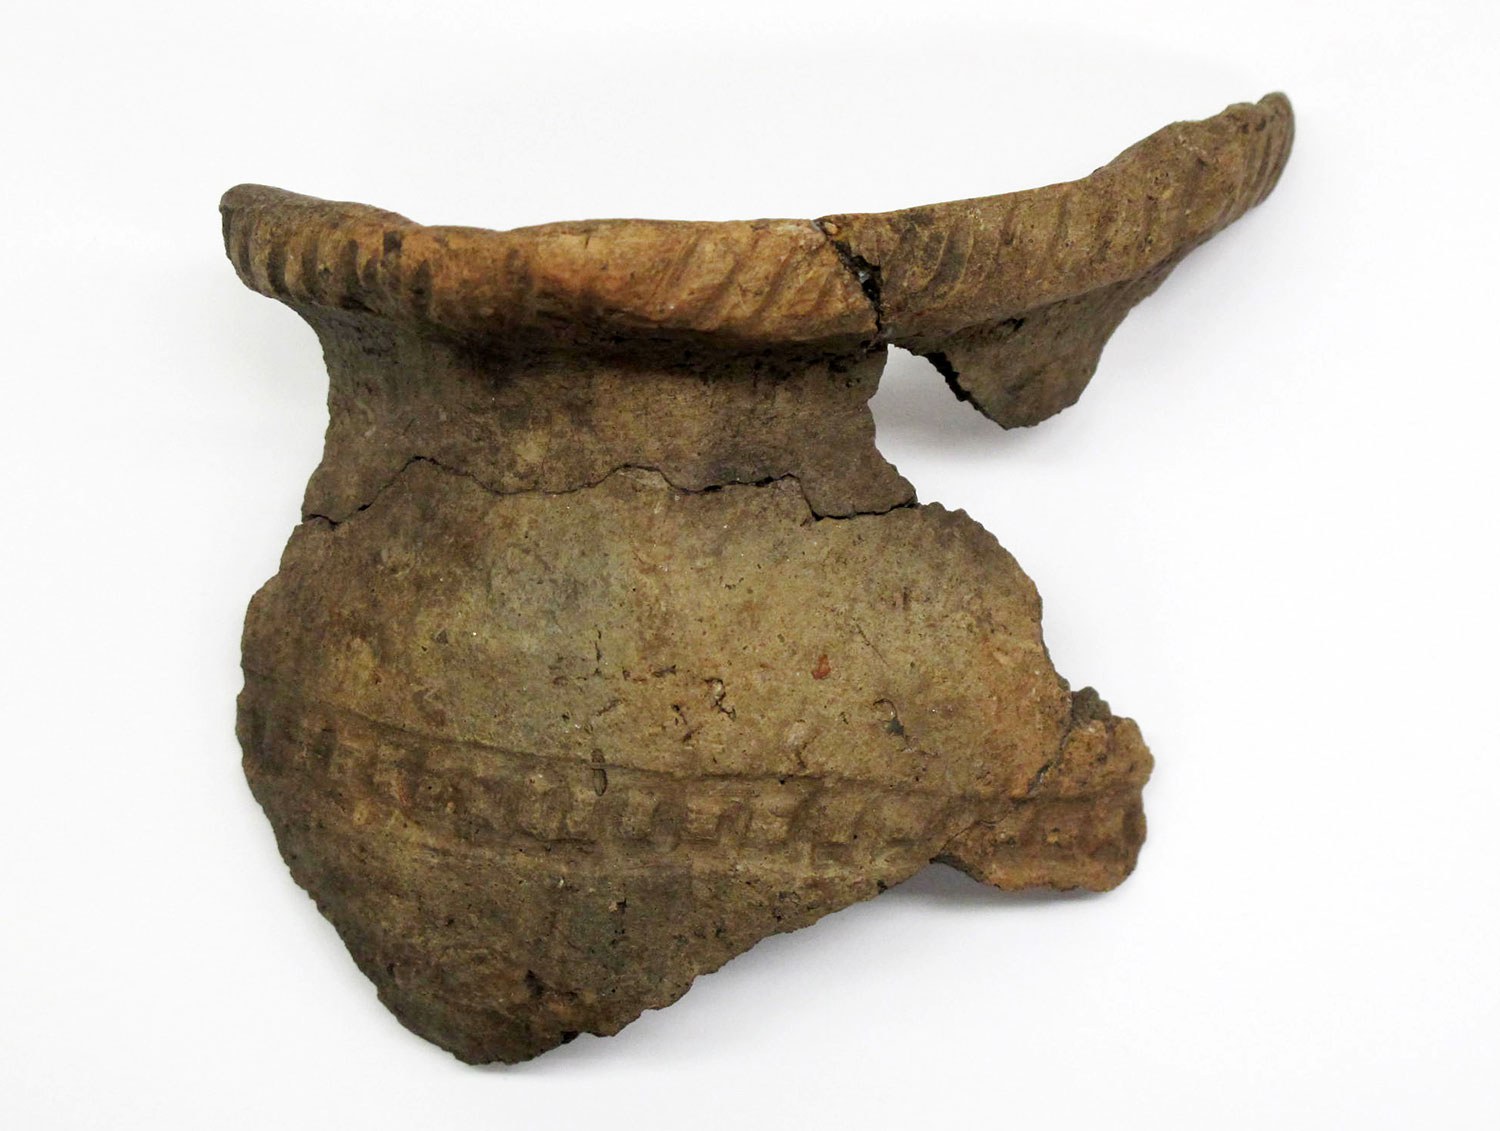 Researcher Holly Martelle identified individual potters at Thomson-Walker based on tiny variations in decoration.